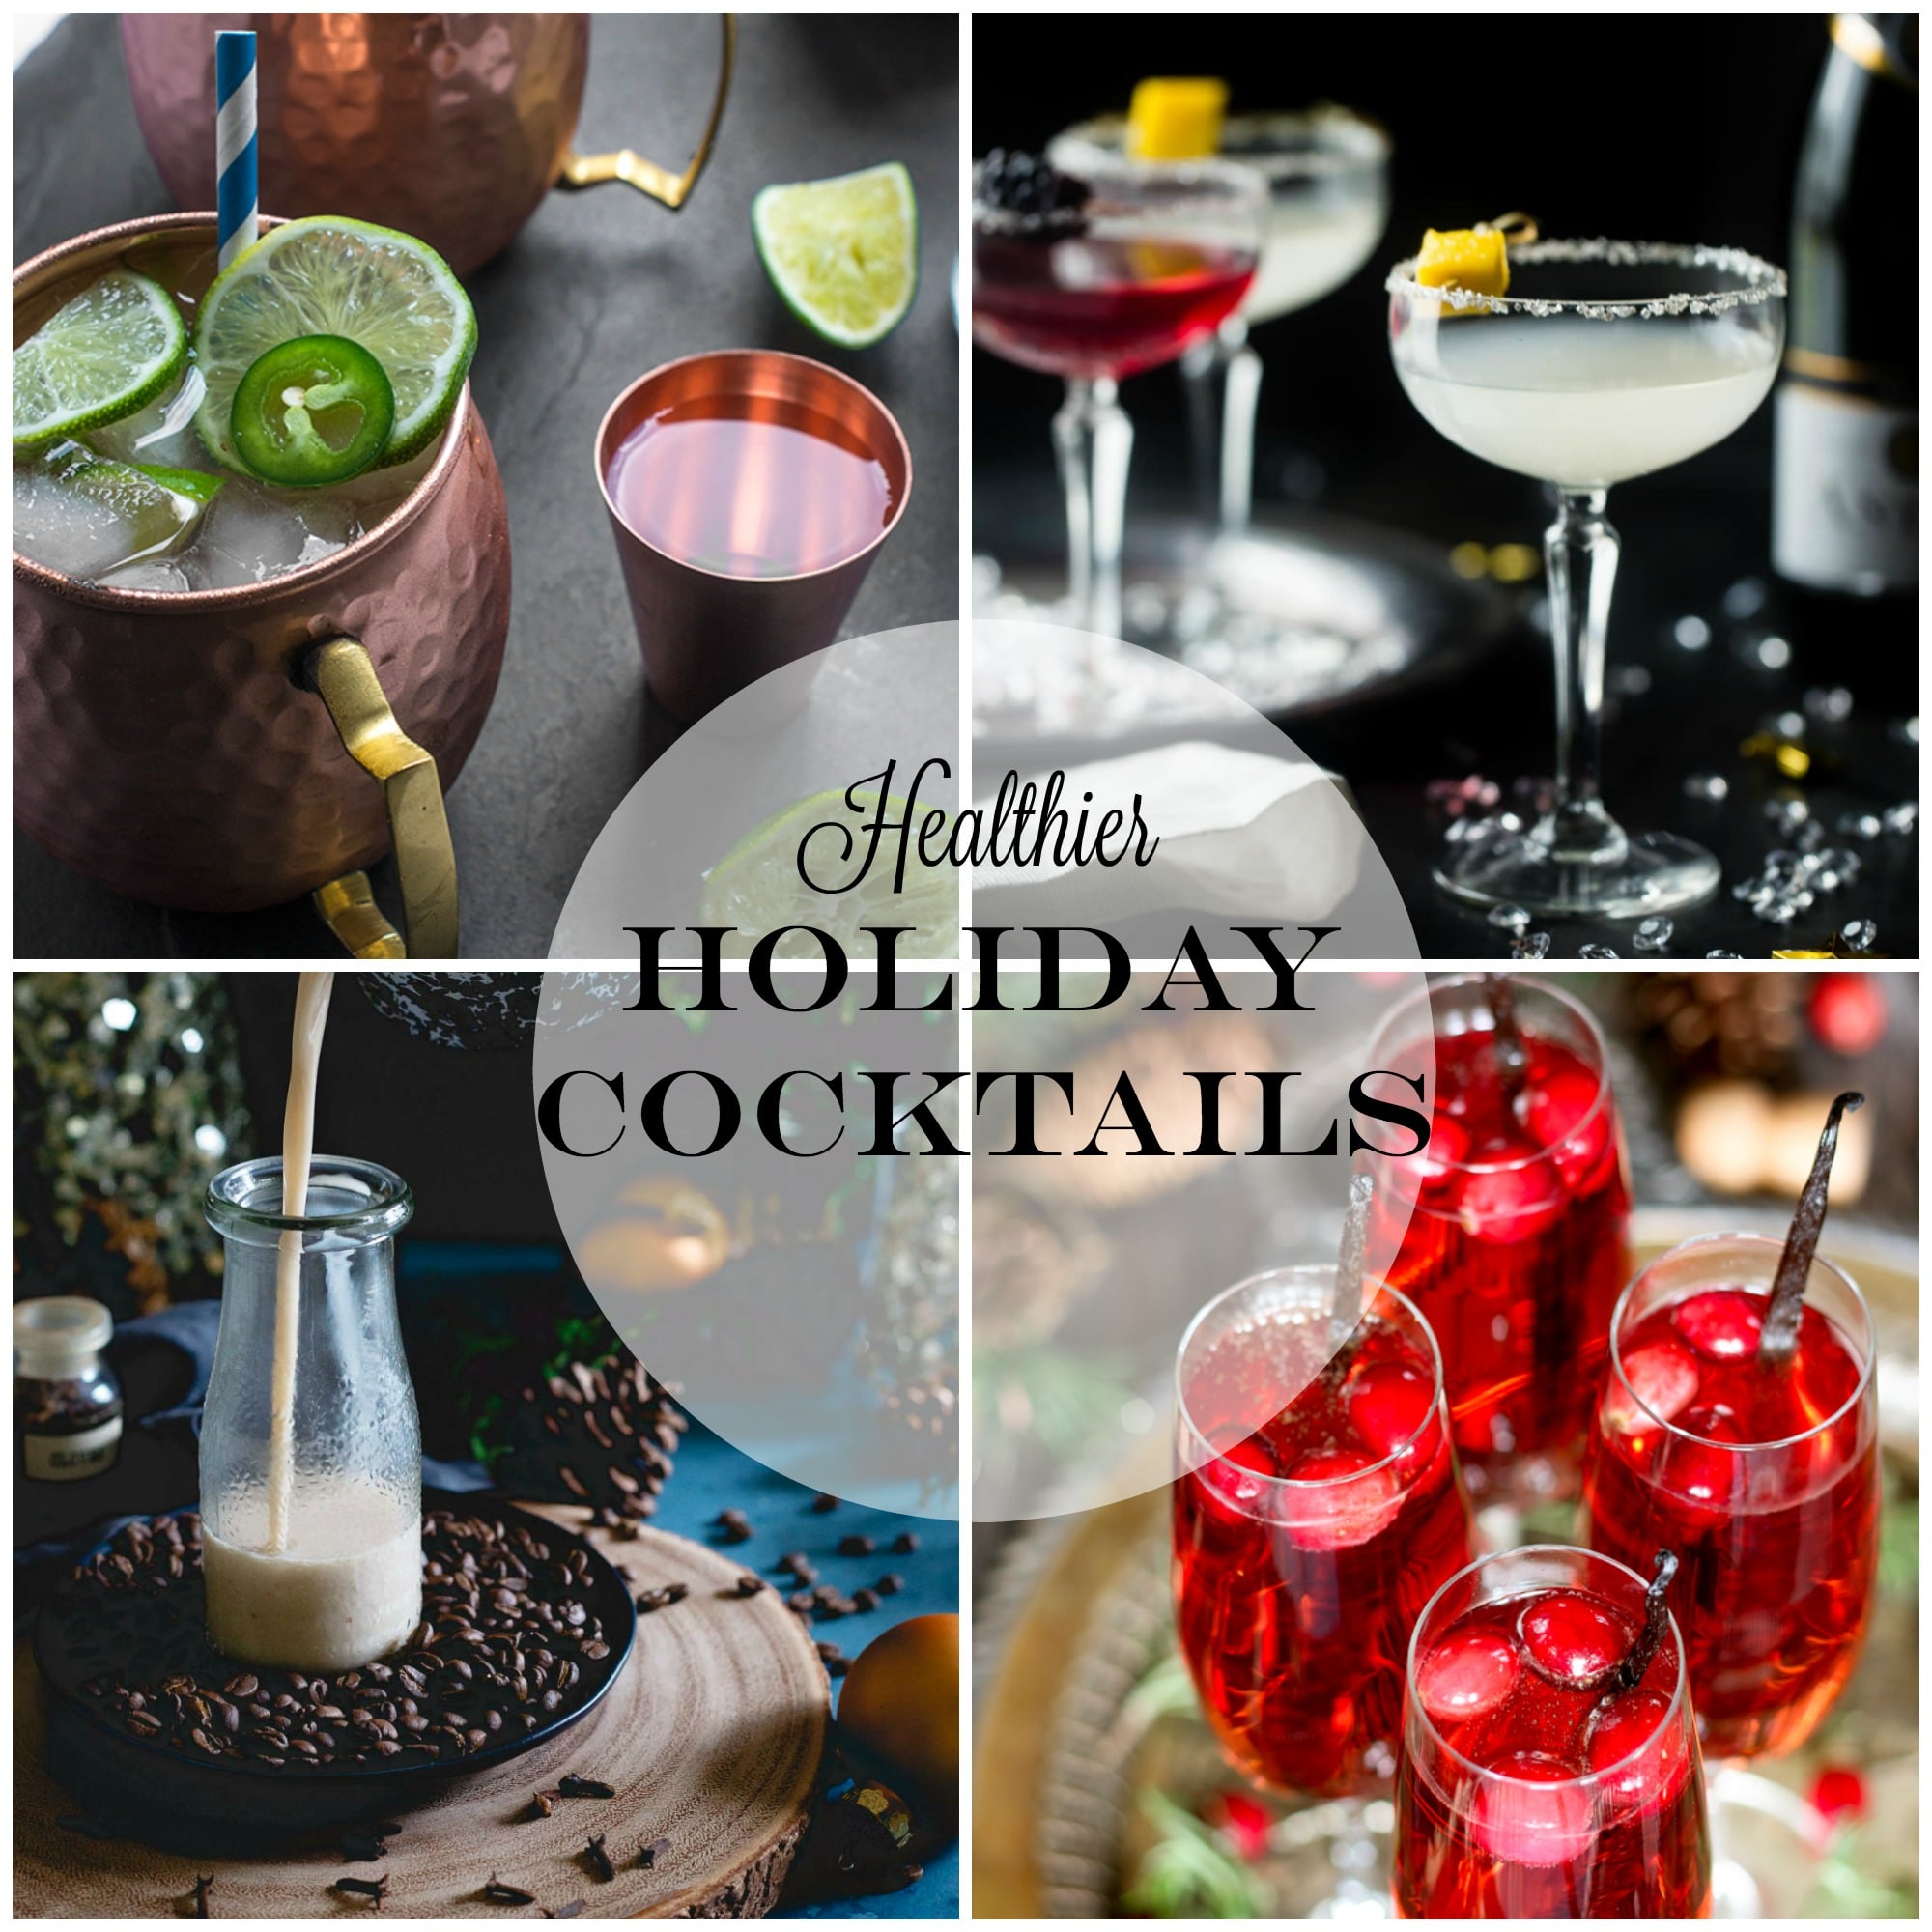 Healthier Holiday Cocktails collage.